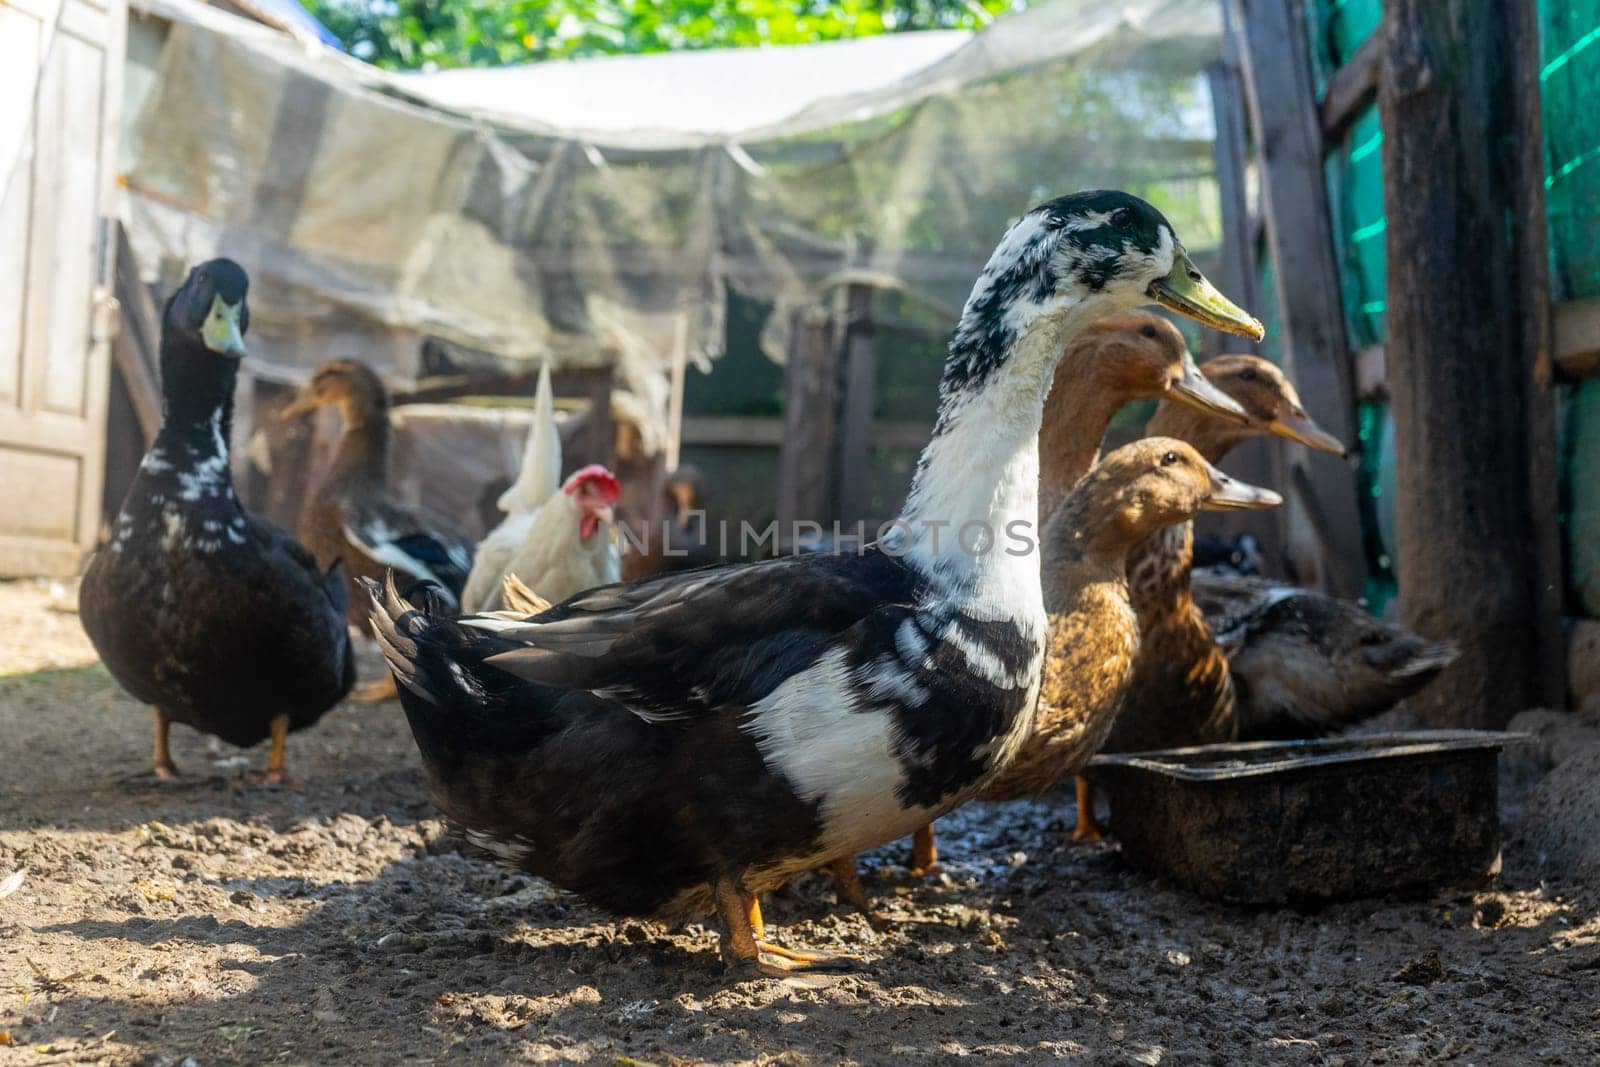 Domestic ducks in poultry yard during feeding.